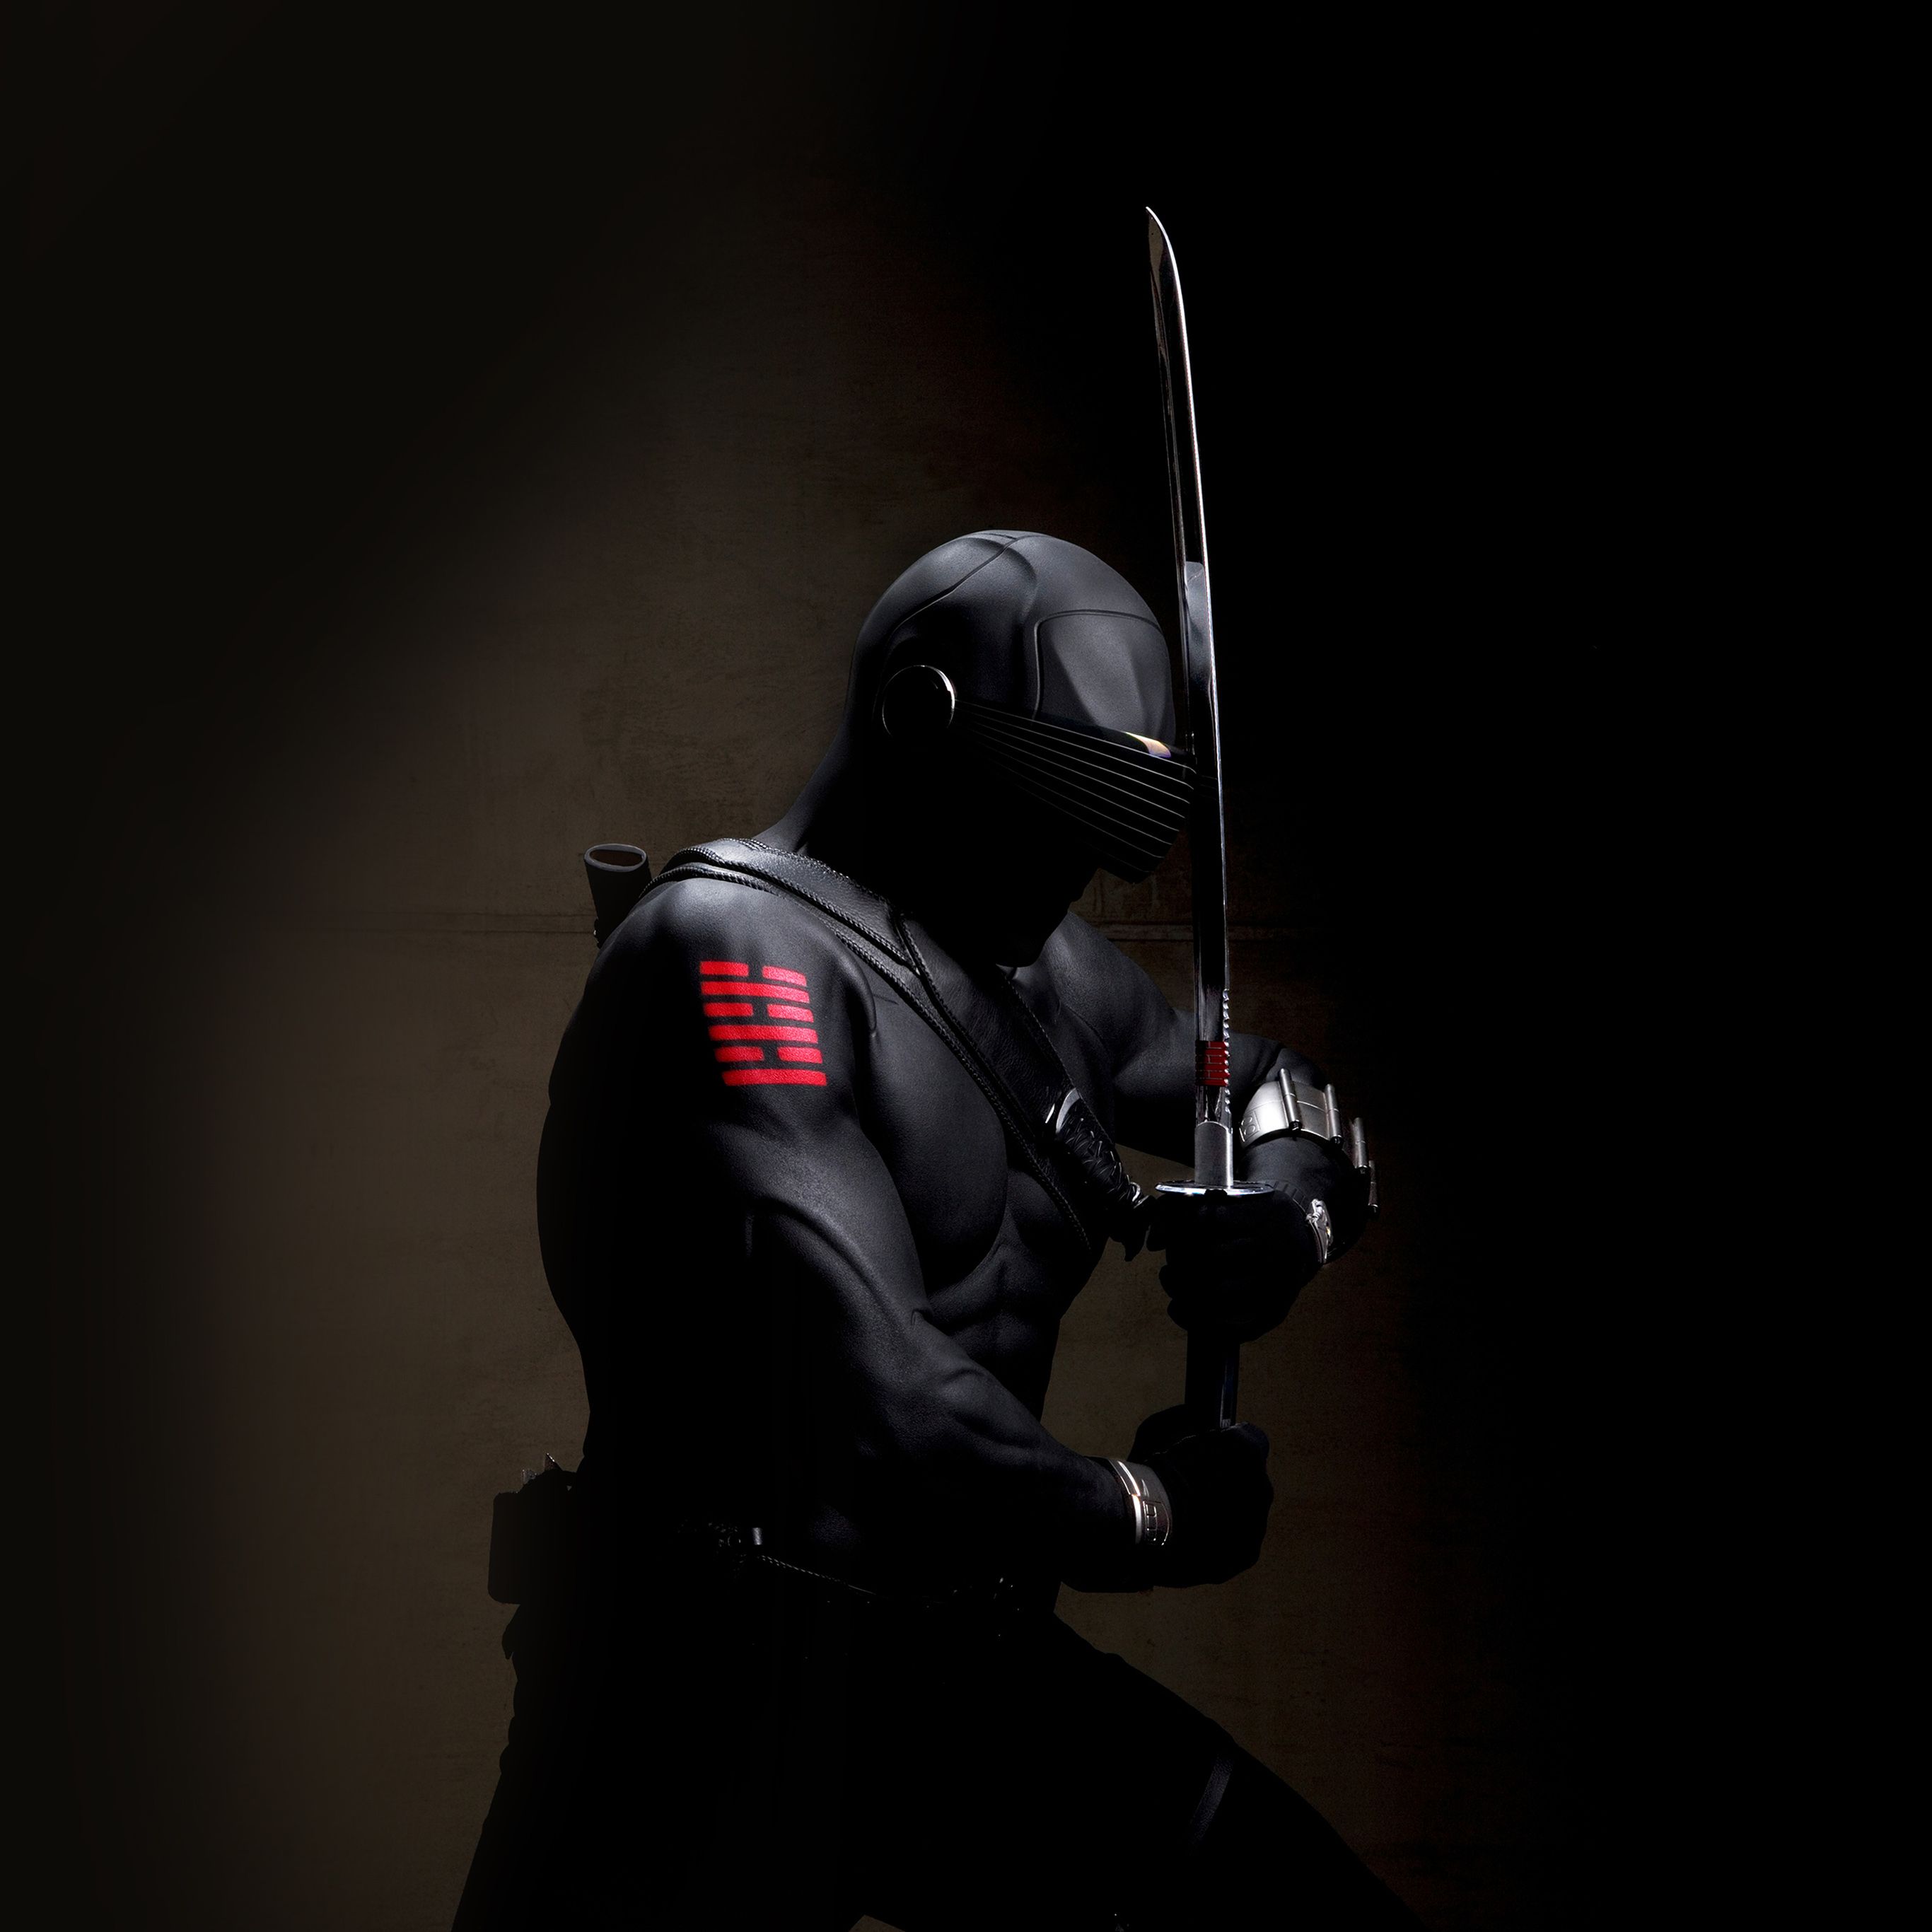 Ninja For Android Wallpapers